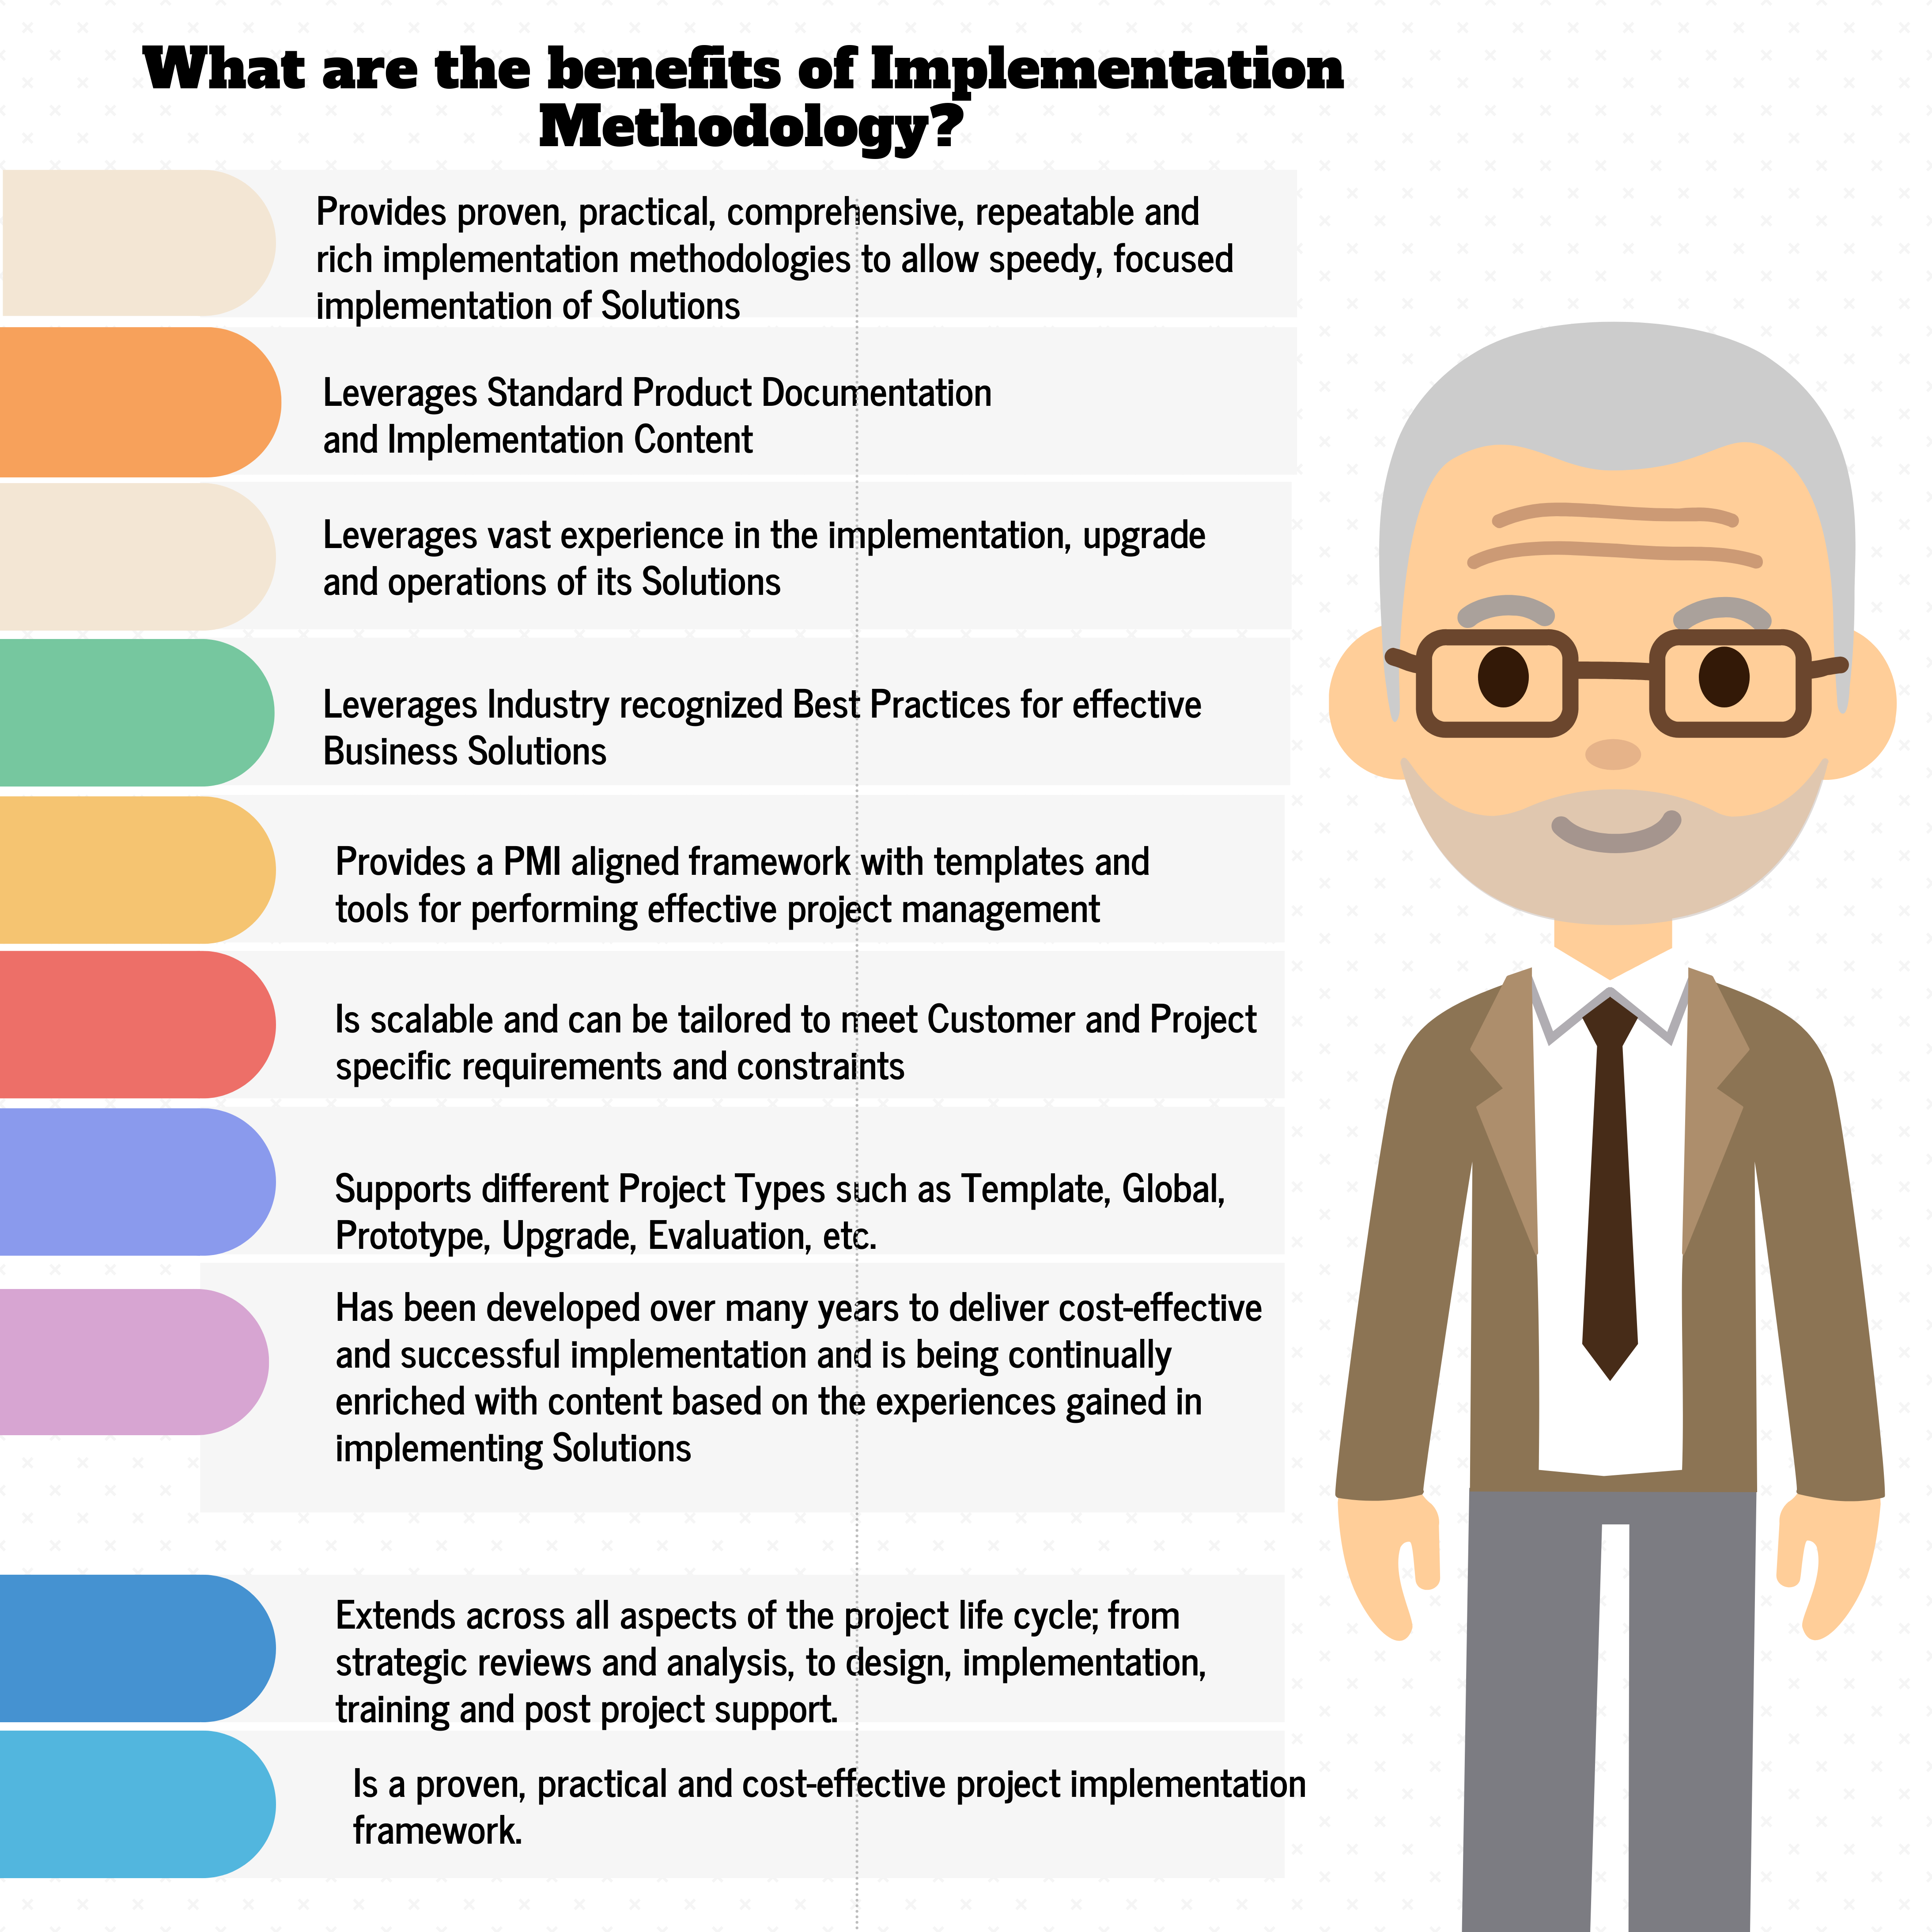 What are the benefits of Implementation Methodology